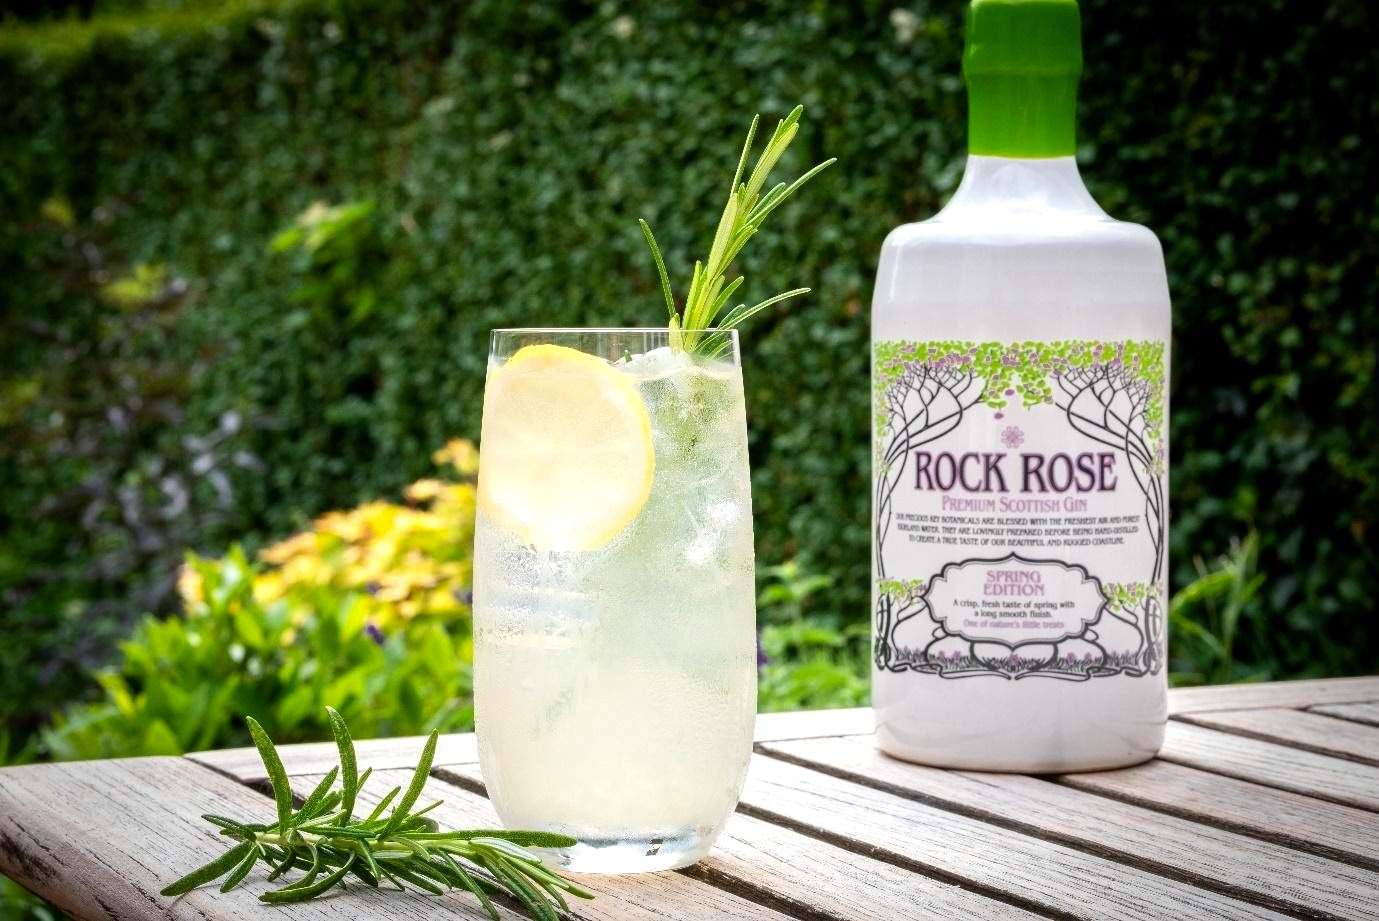 The Elderflower and Herb Gin Fizz incorporating the Rock Rose Spring Edition Gin.